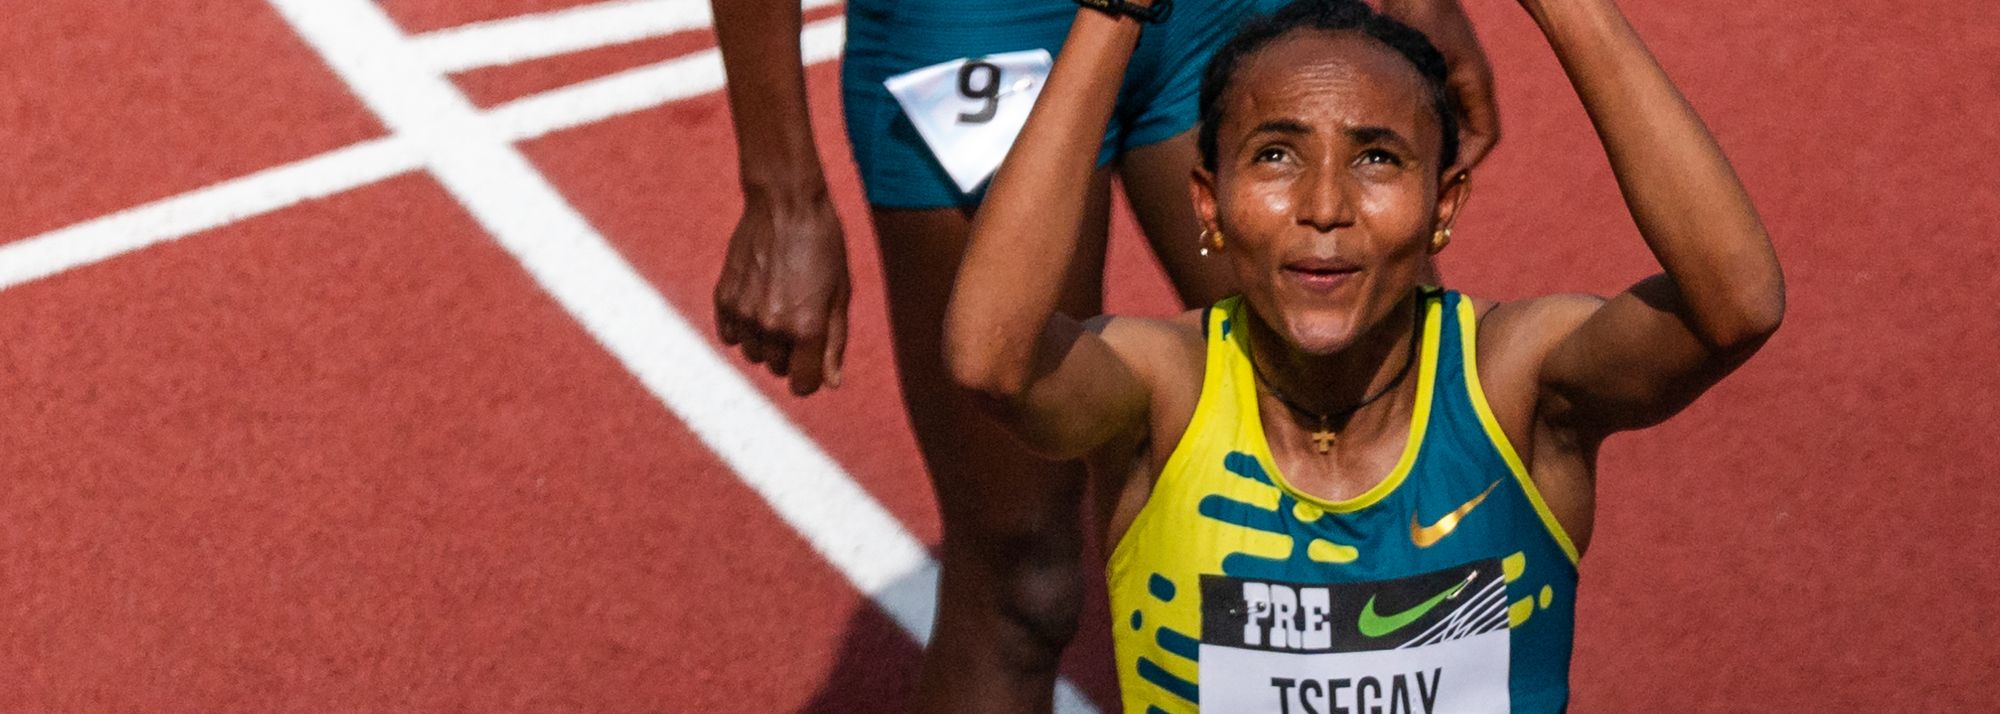 World 5000m record is the latest in a long line of notable performances for Gudaf Tsegay in Oregon